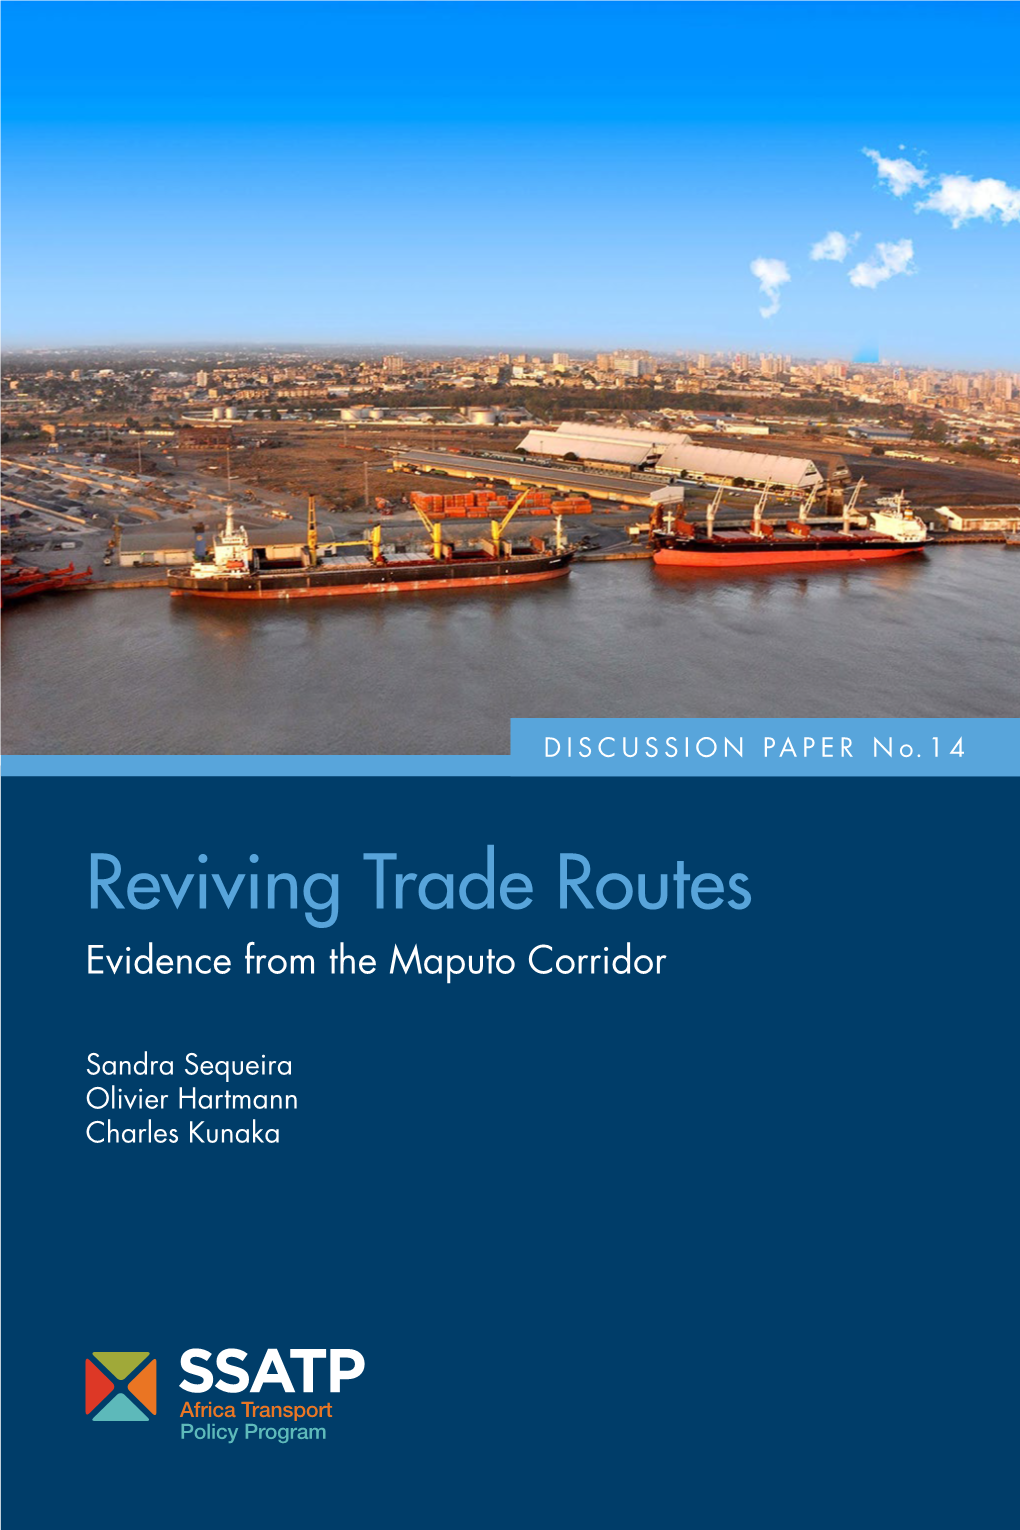 Reviving Trade Routes: Evidence from the Maputo Corridor